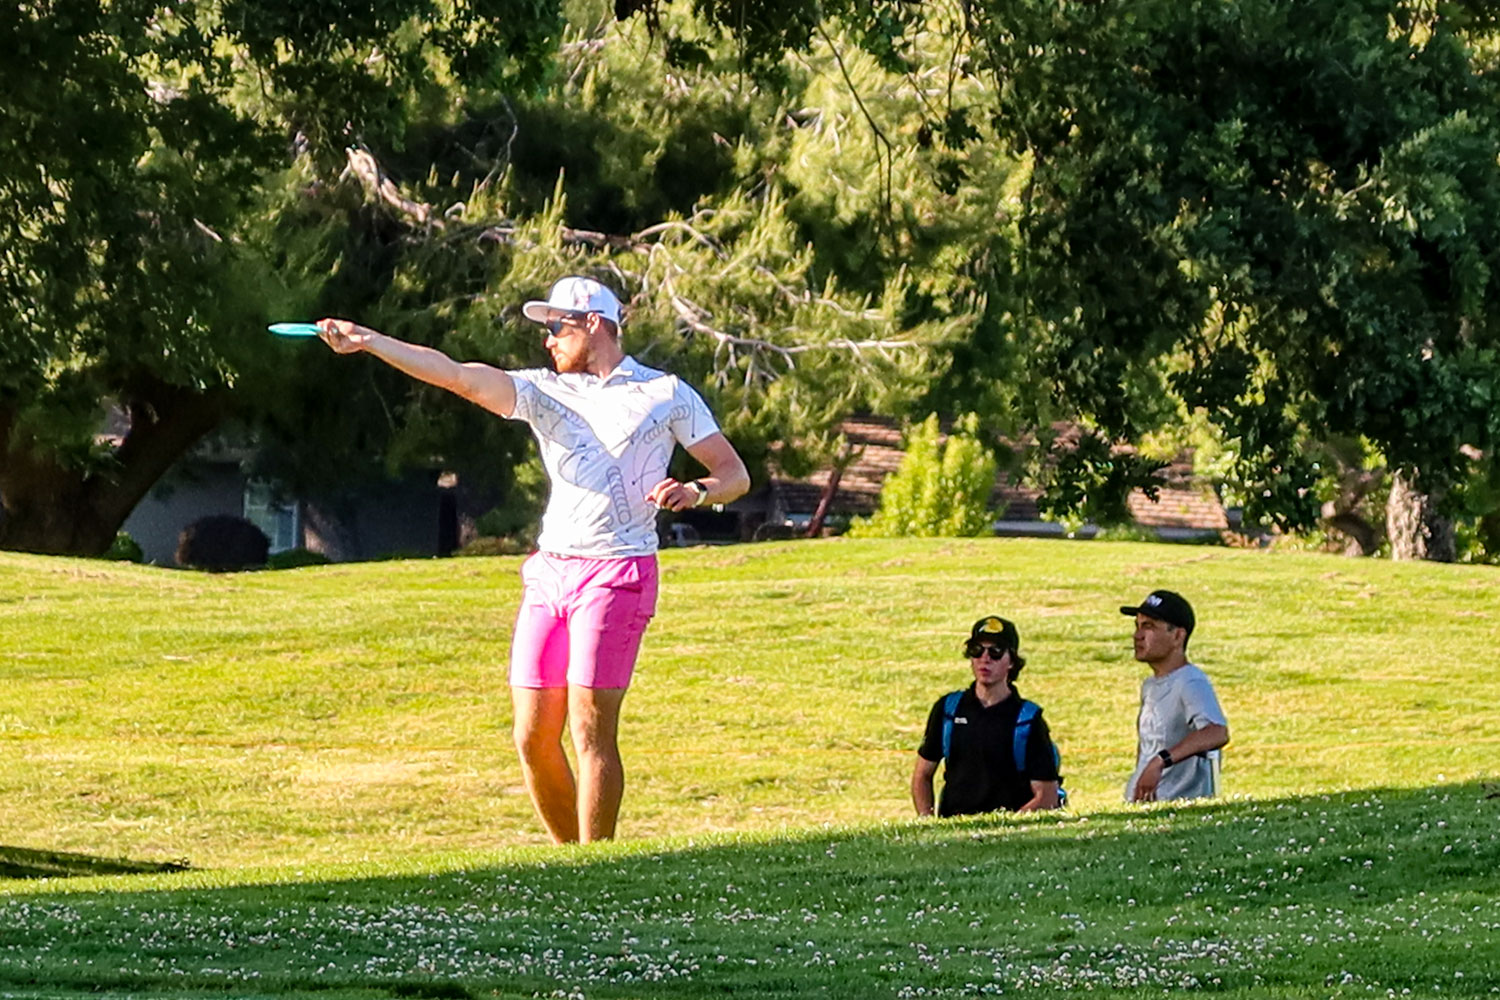 A professional disc golfer throwing a forehand